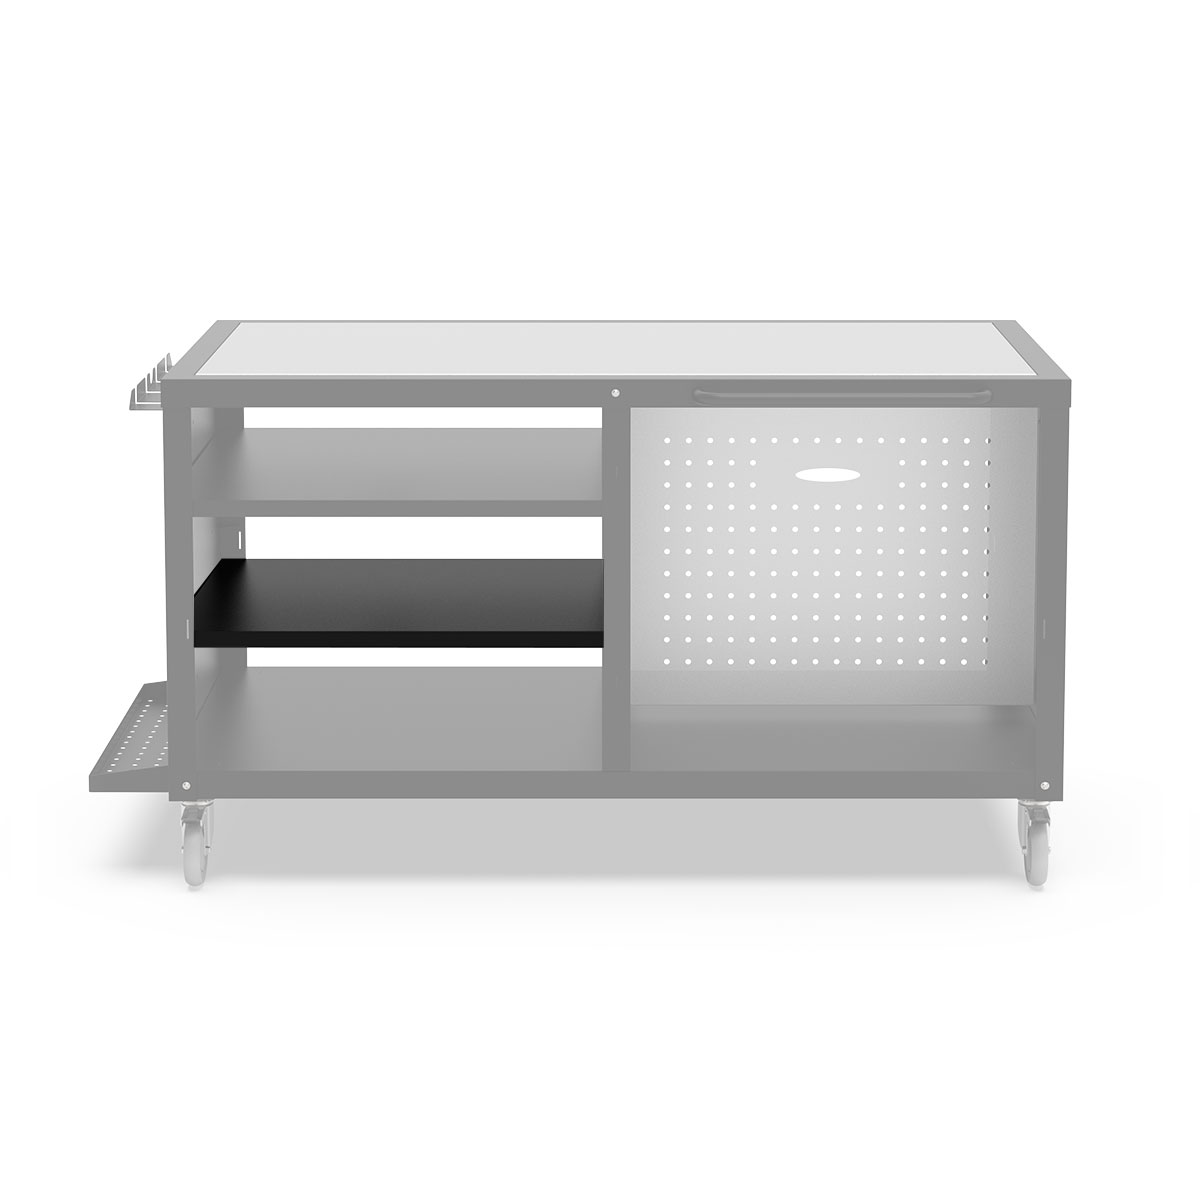 Structure Cooking Station 160 | Alfa Forni